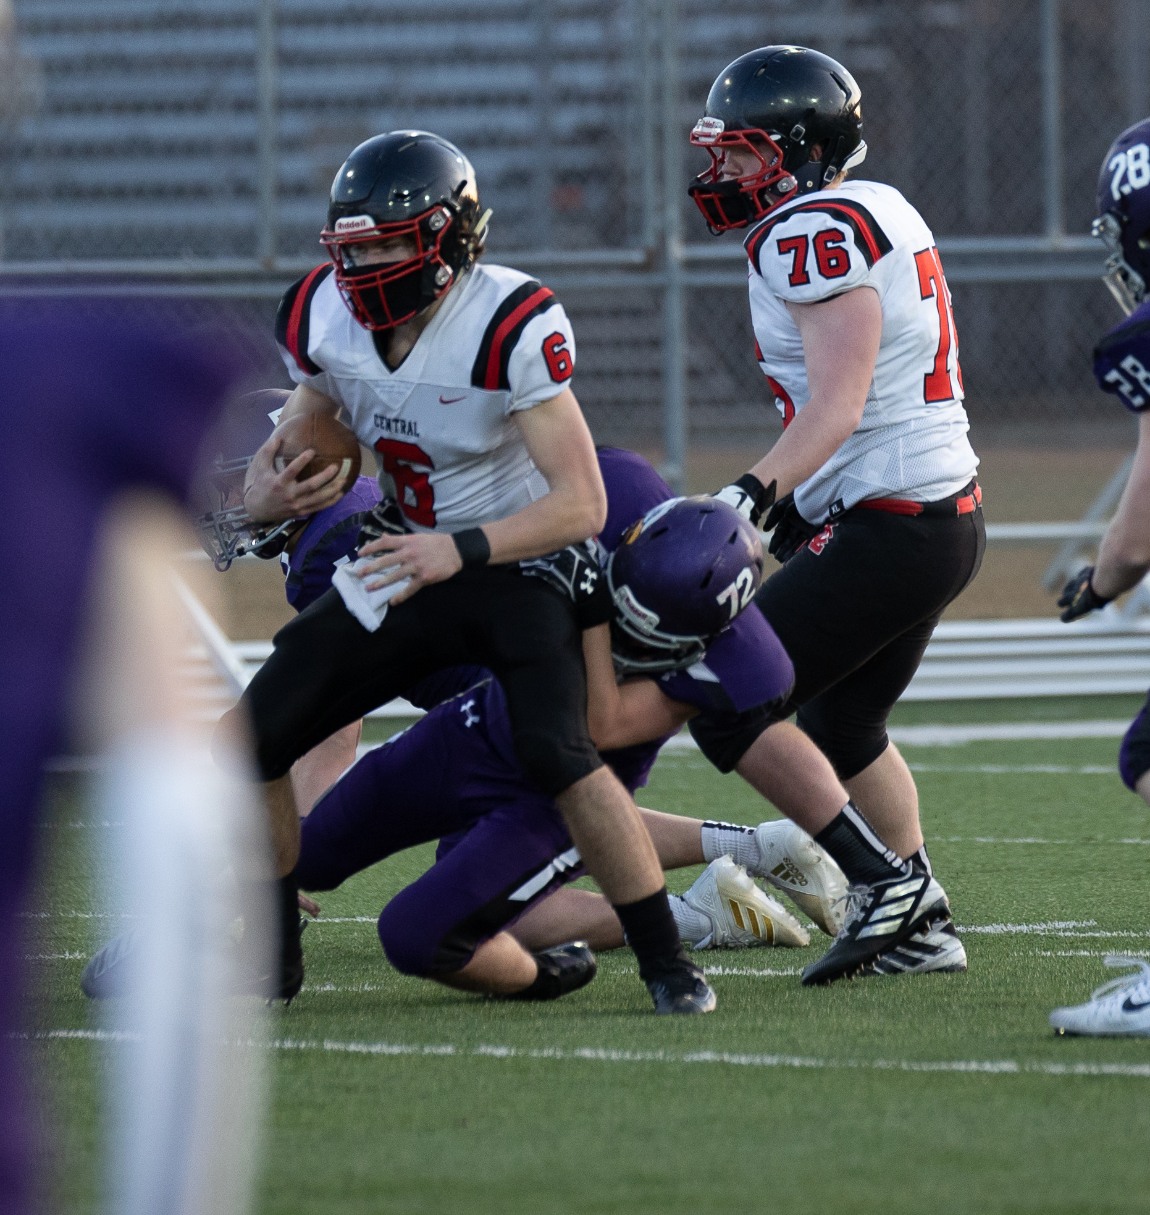 Eau-Claire-Memorial-JV-Football-LaCrosse-Central-at-Home-3-29-21-1508